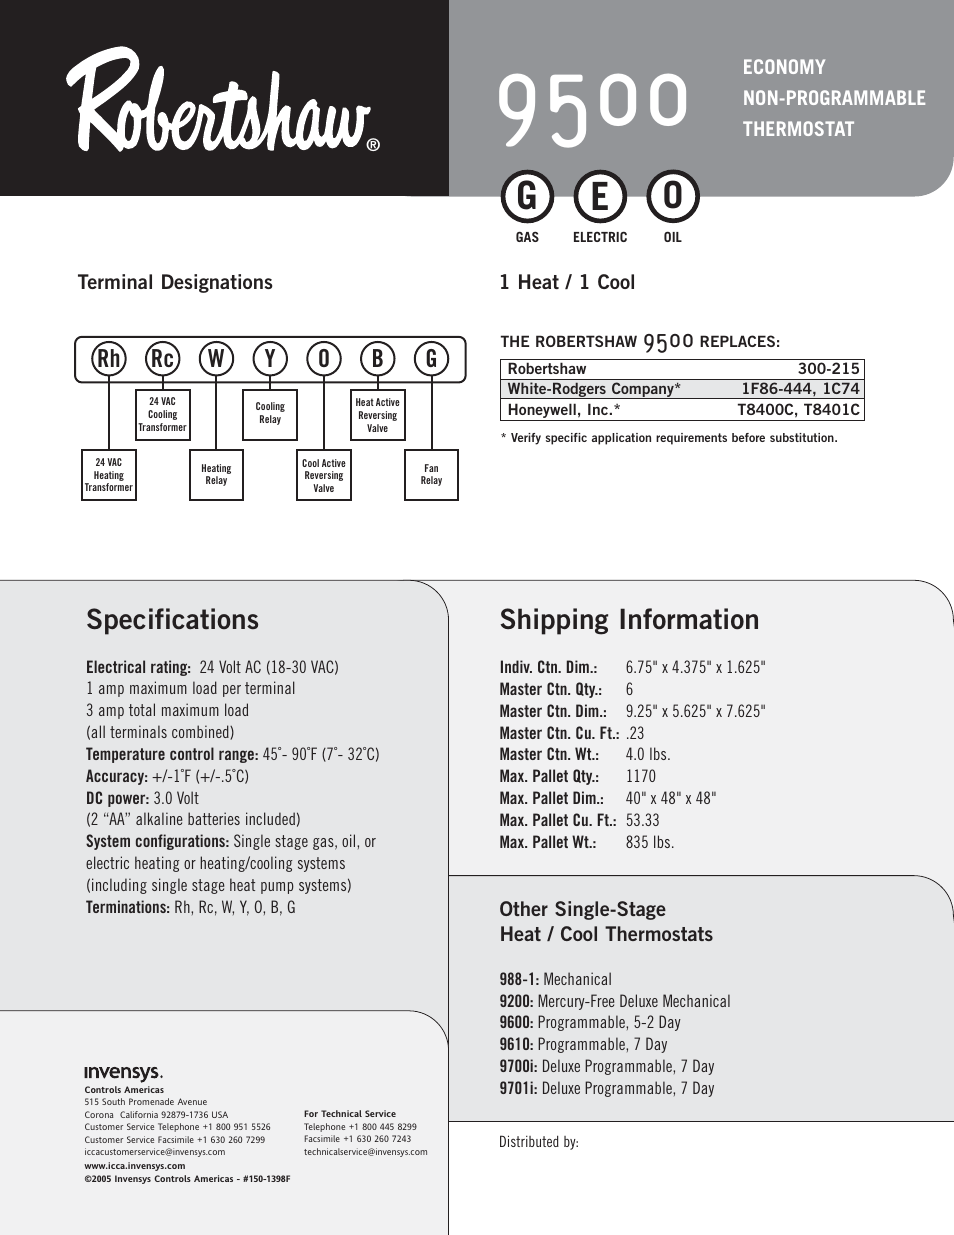 Shipping information, Specifications | Robertshaw 9500 User Manual